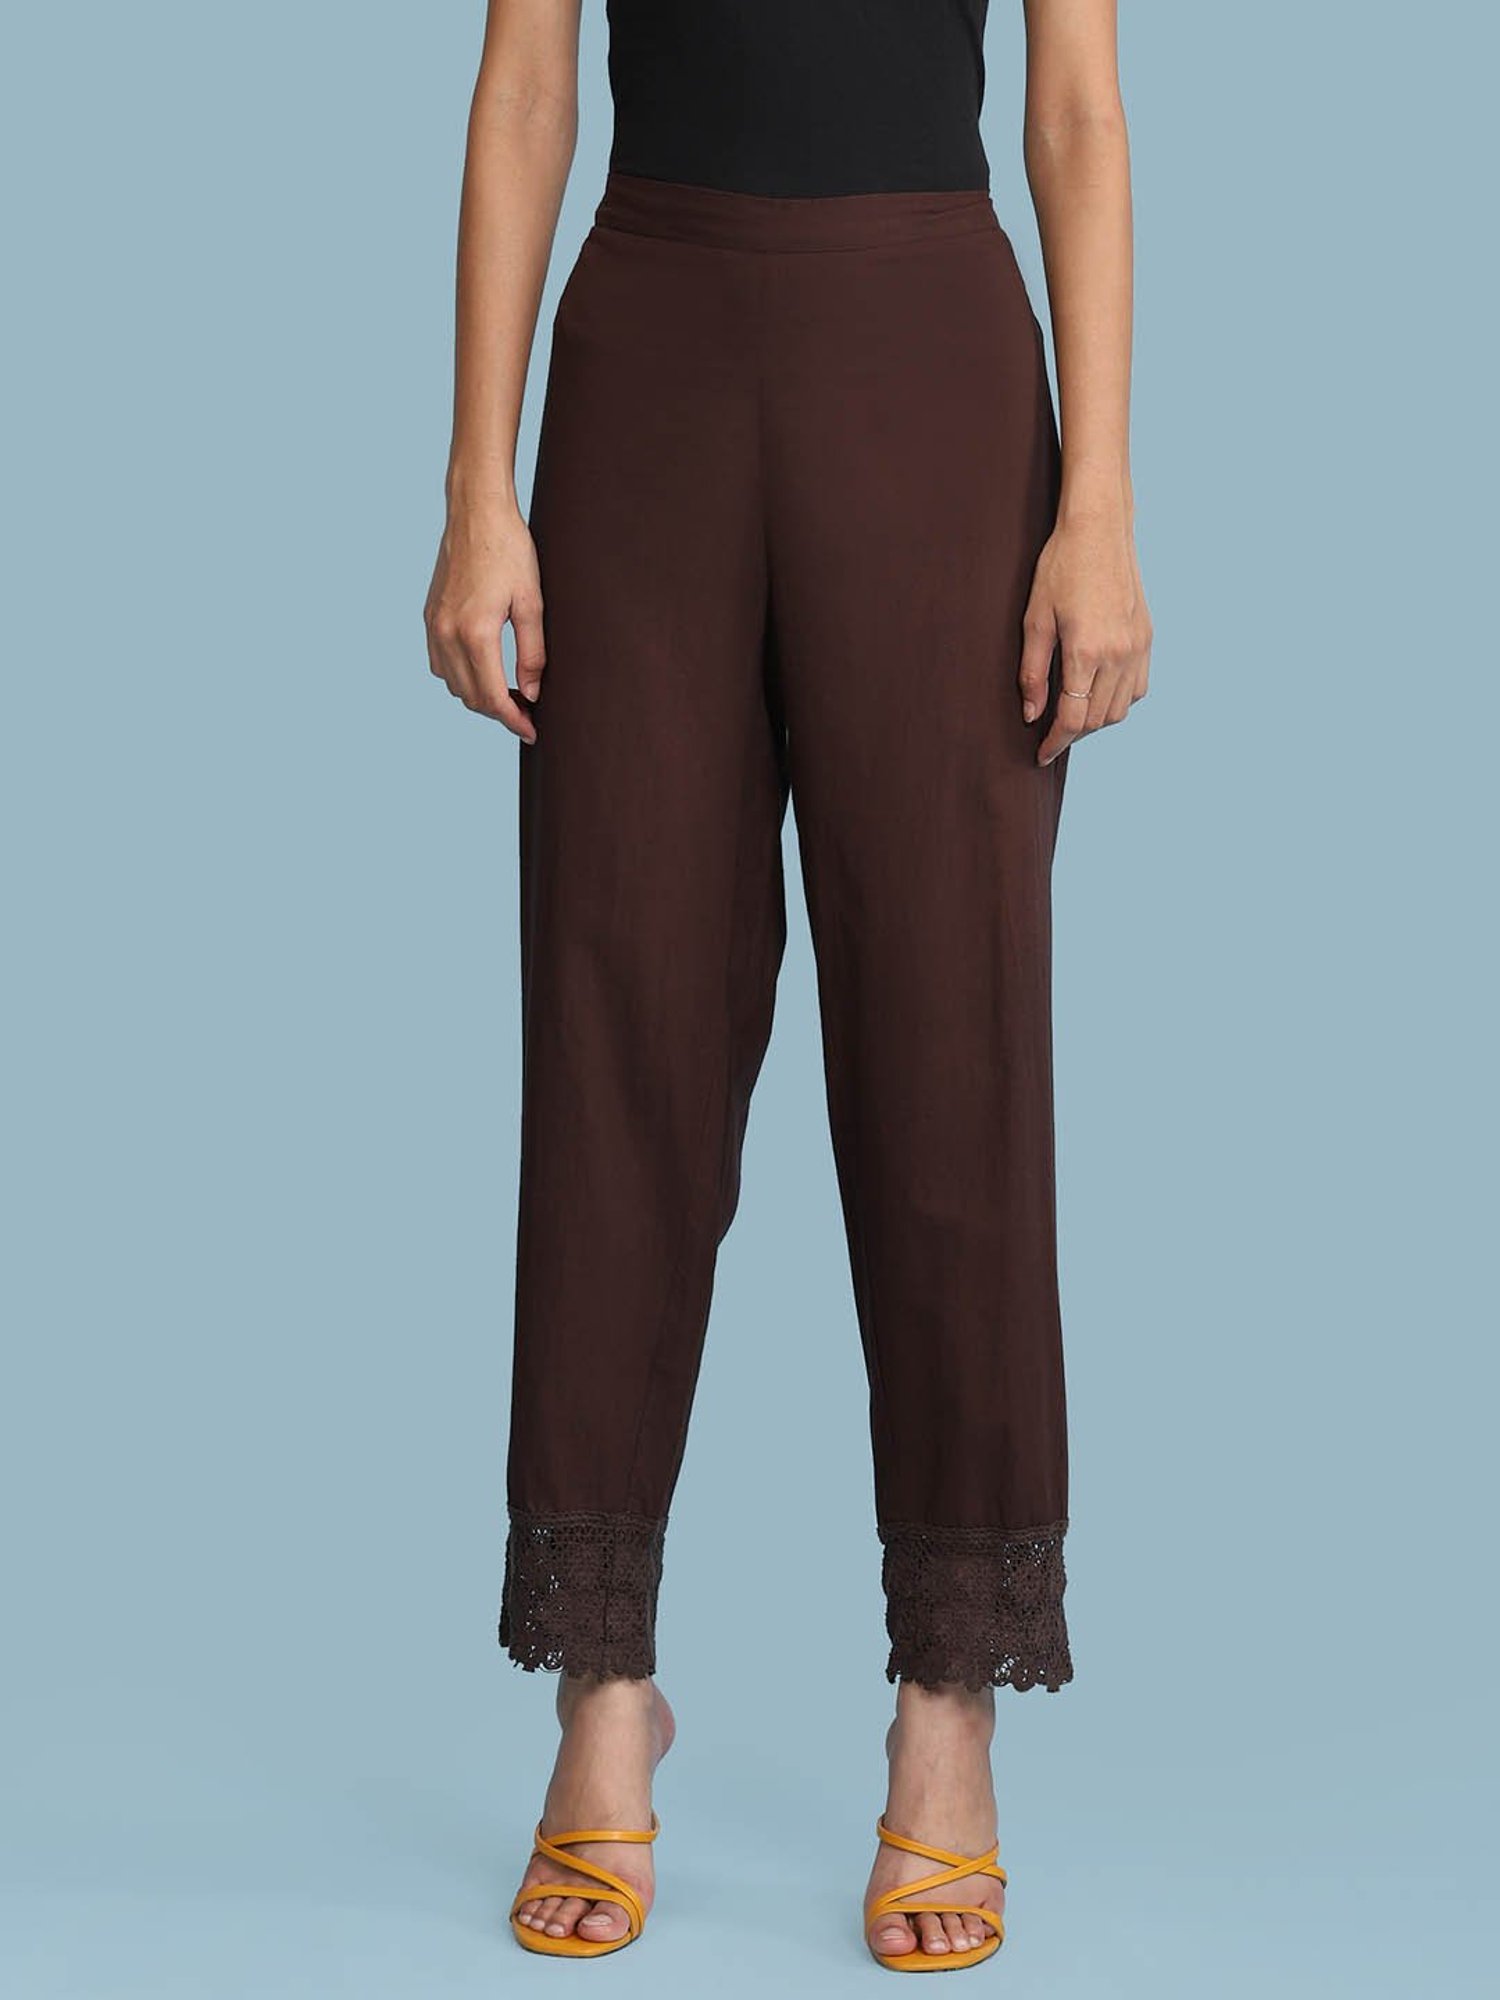 Real Bottom Regular Fit Women Brown Trousers  Buy Real Bottom Regular Fit Women  Brown Trousers Online at Best Prices in India  Flipkartcom